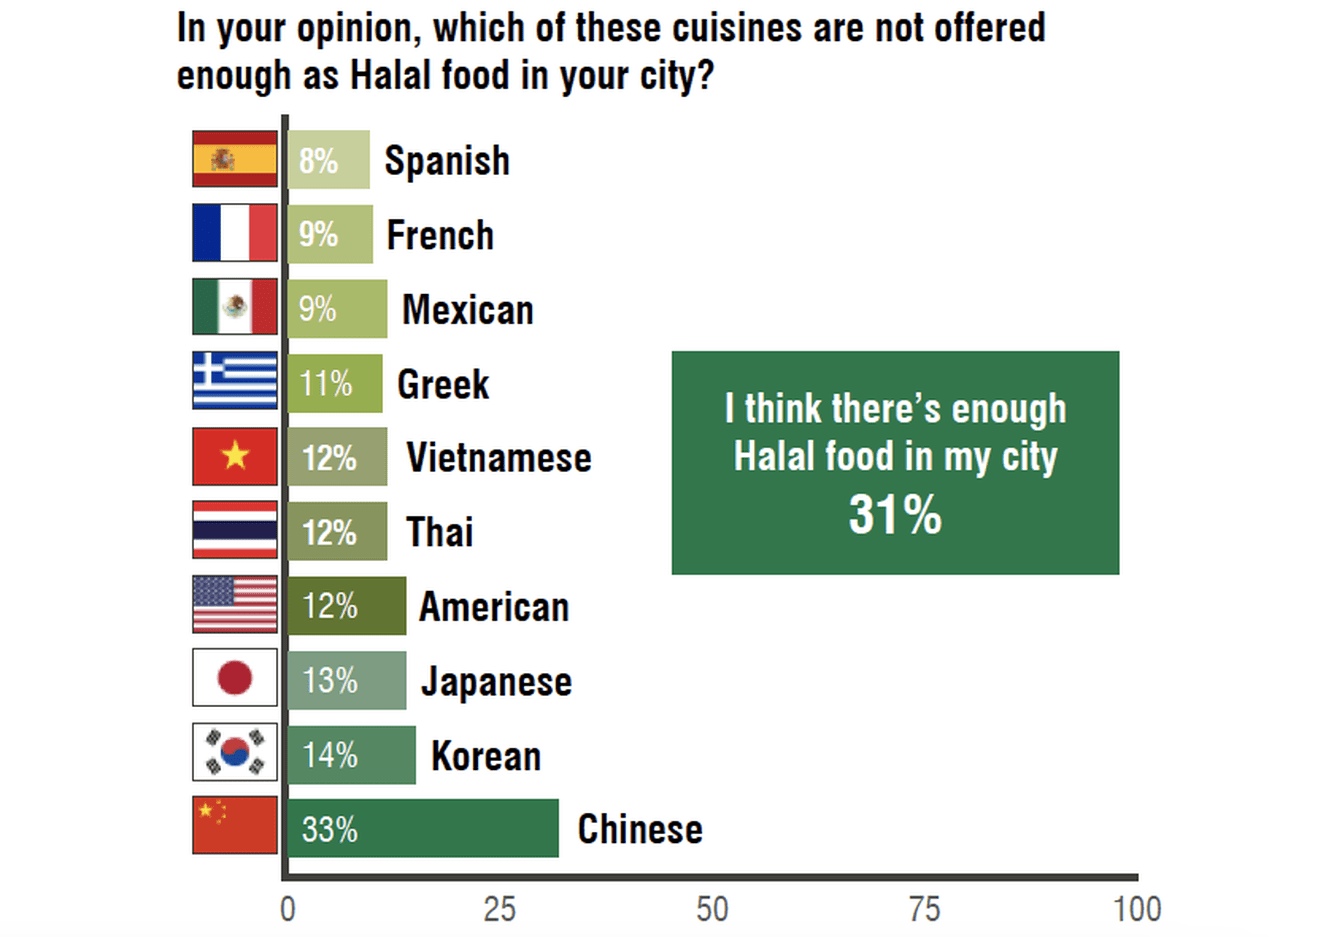 Vertical bar graph of Indonesia survey respondents on 'which of these cuisines are not offered enough as Halal food in your city'